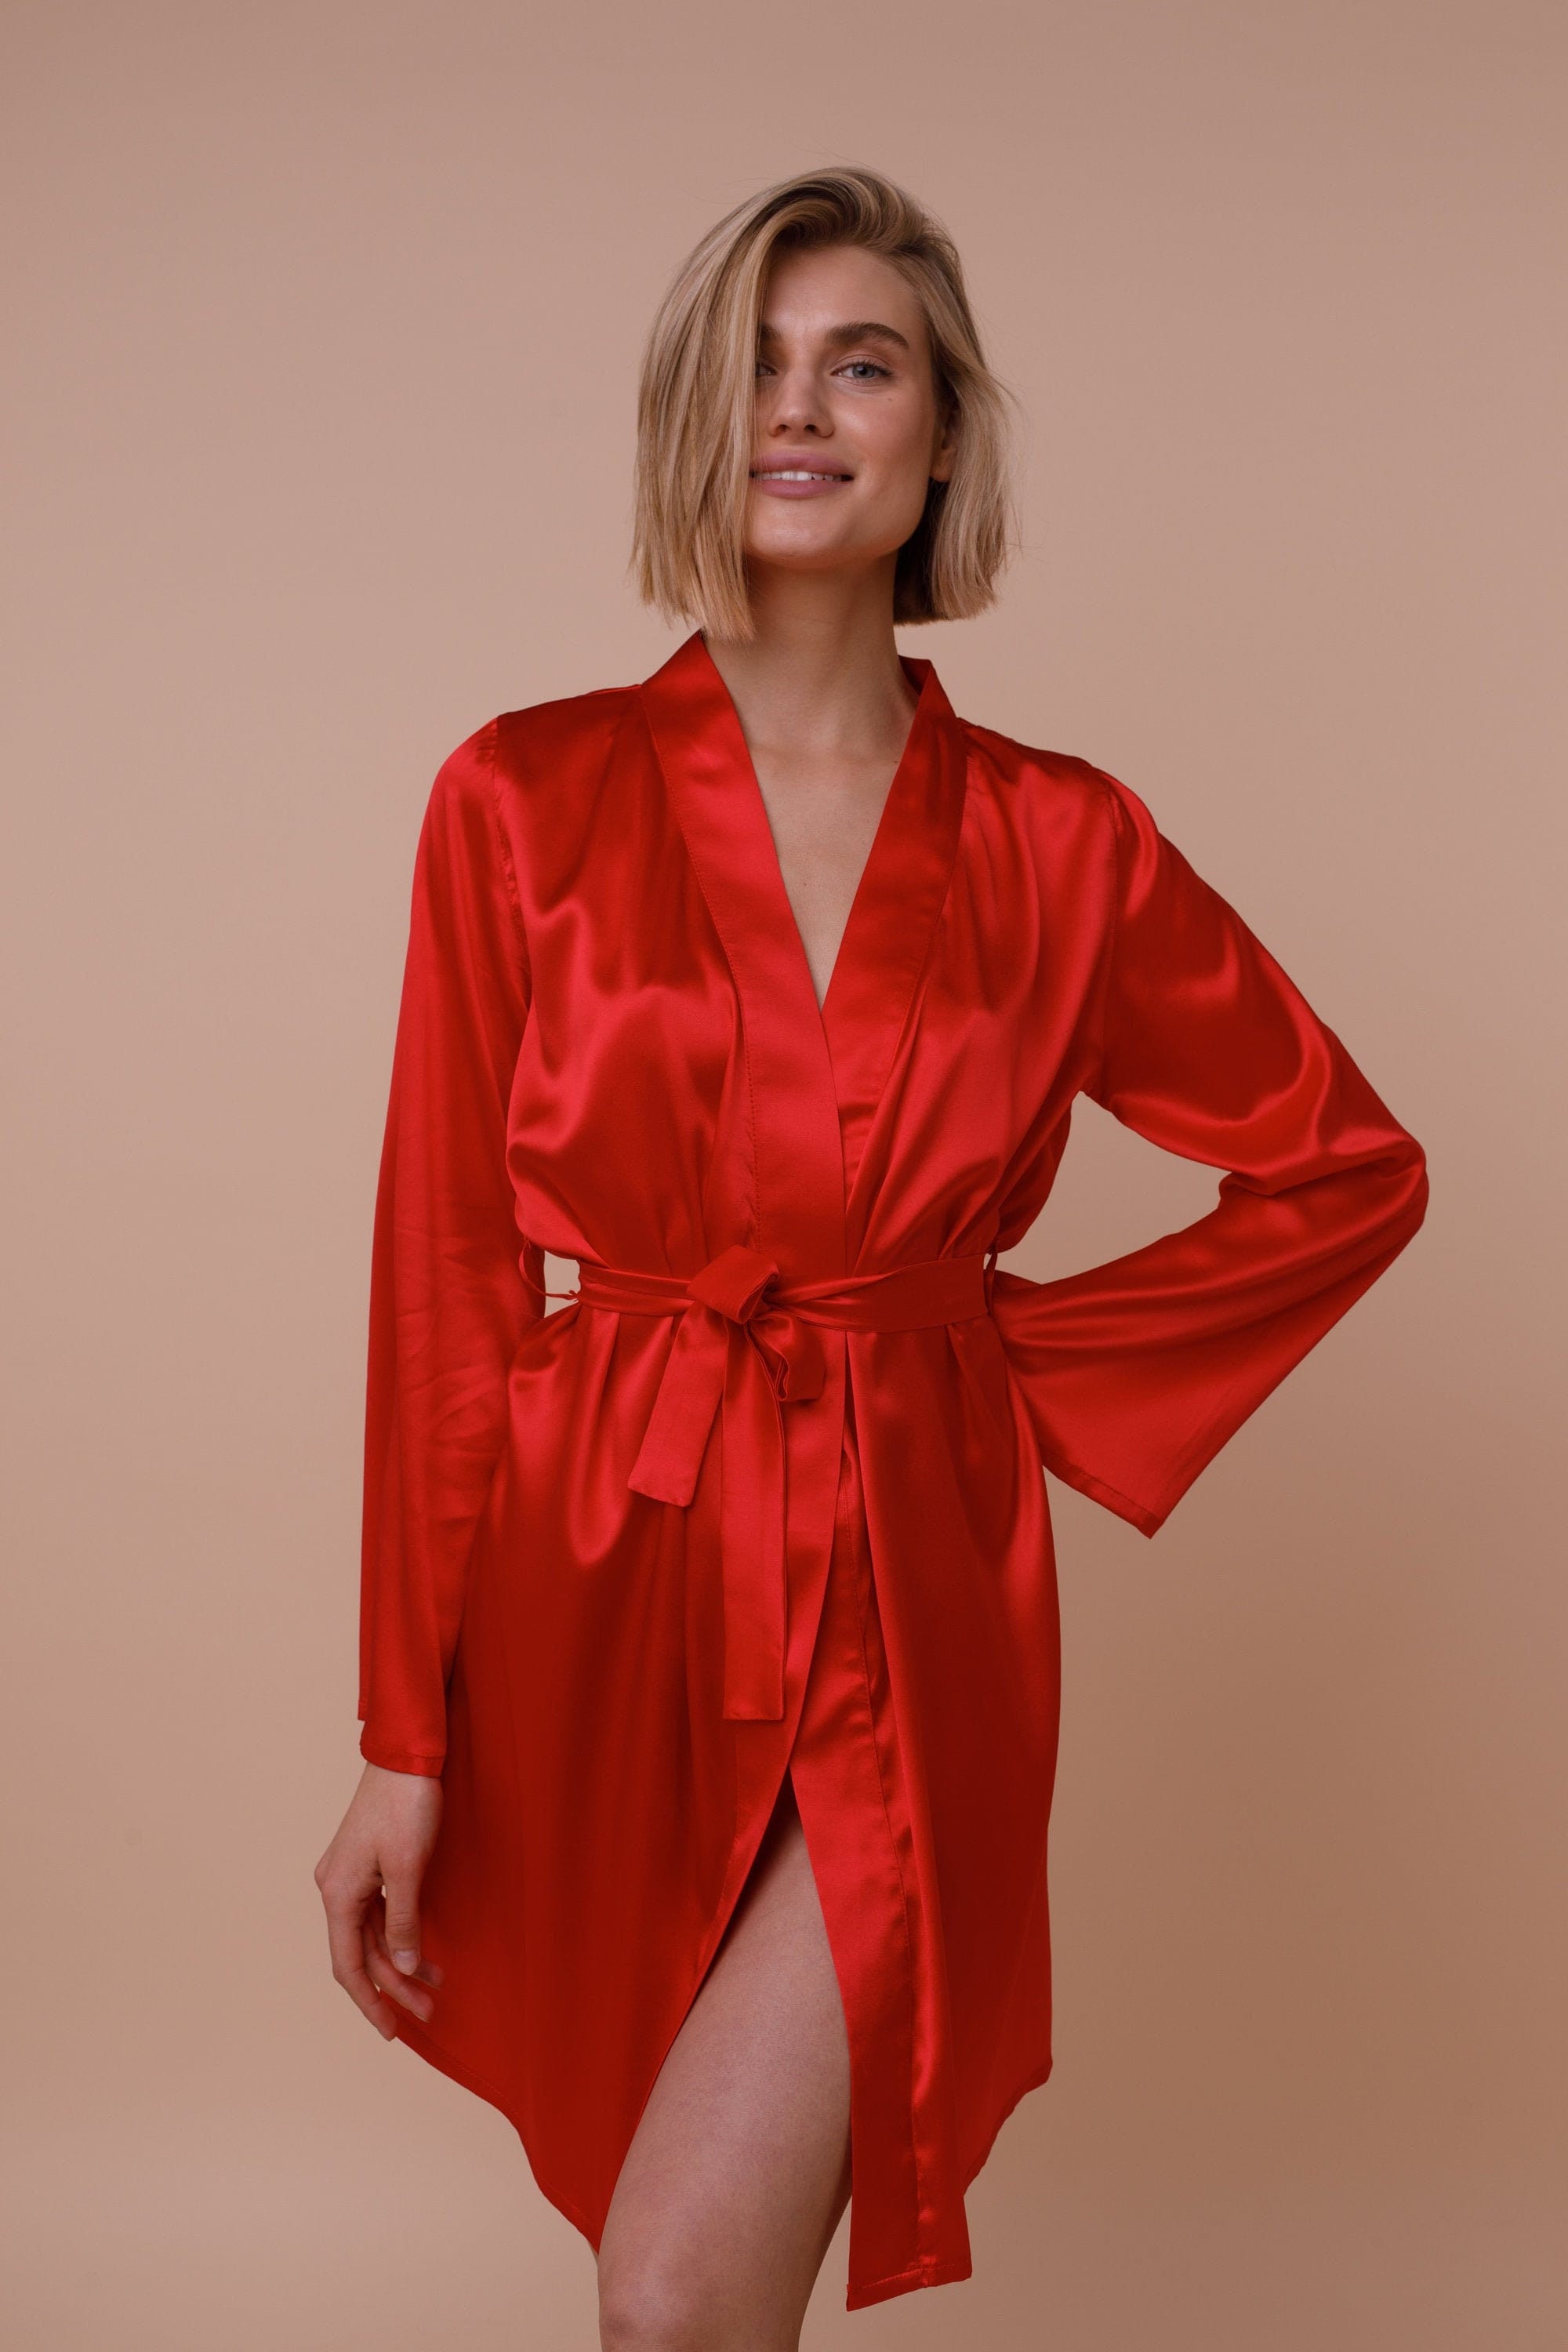 Elevanto Premium Collection Micro Satin Regular Size Red Color Womens Robes  : Amazon.in: Home & Kitchen